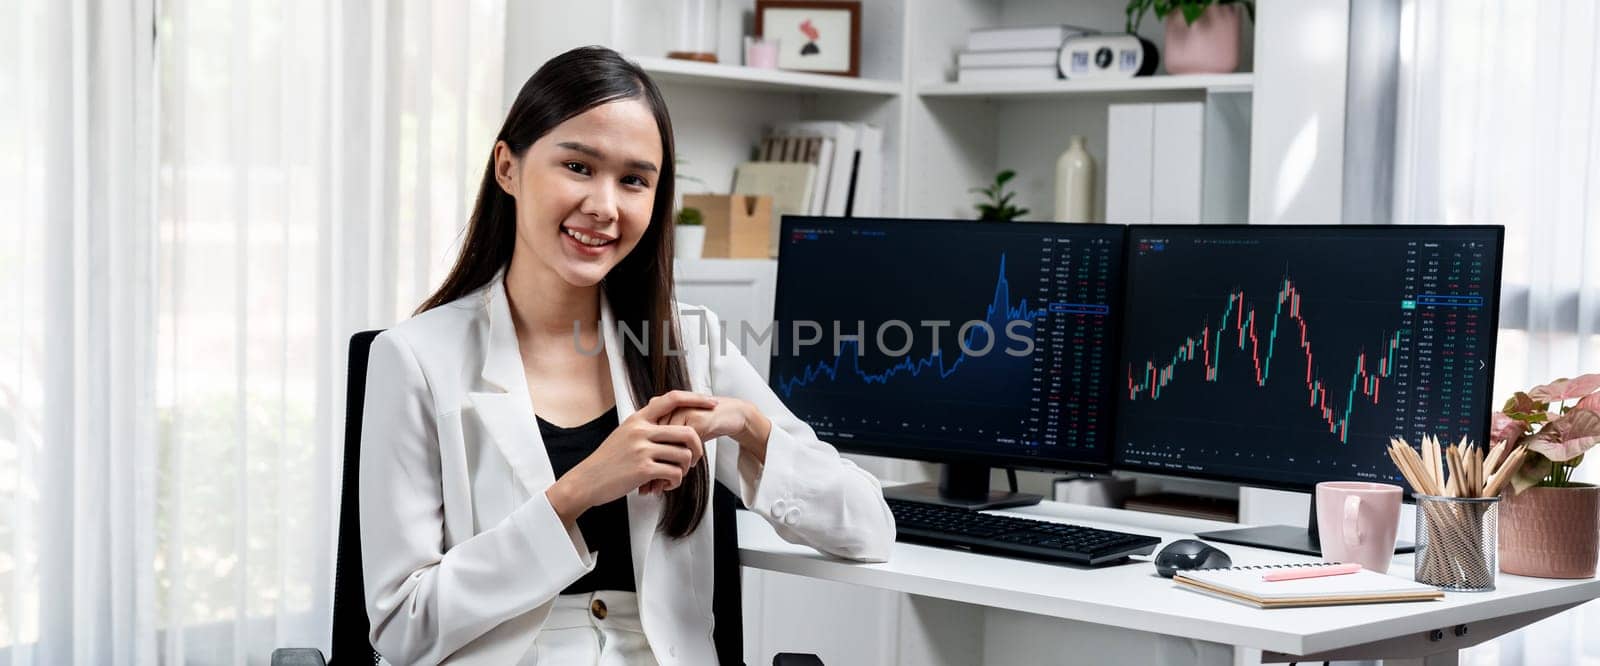 Profile of young Asian businesswoman smiling on happy face with white suit sitting chair against dynamic stock exchange market investing graph on pc showing screen on desk at modern office. Stratagem.